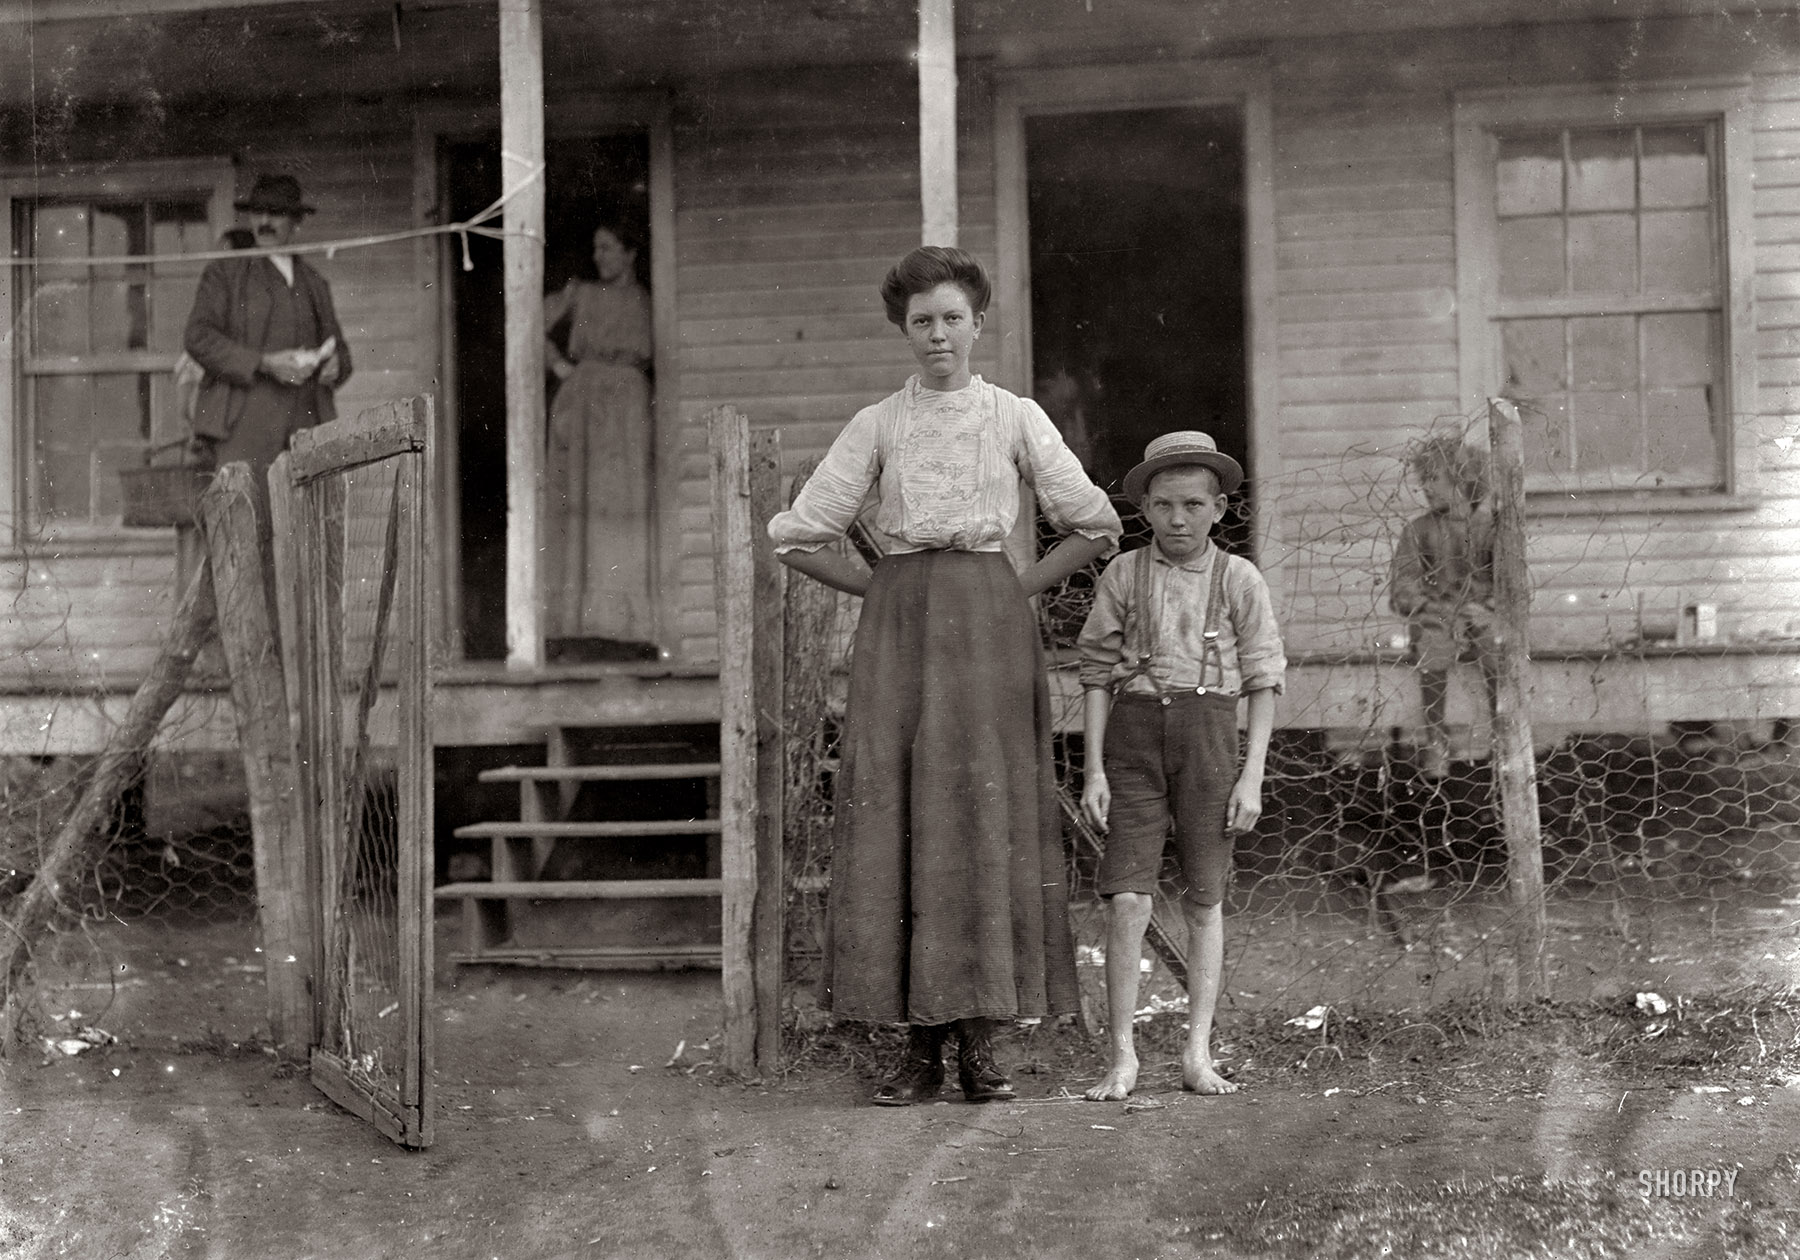 November 1908. Chester, South Carolina. "Jamie Sherley, (girl). Wylie Mills. Been in mill six years. Ambro Sherley, 11 years old. Been in mill over one year." Photo and caption by the child-labor documentarian Lewis Wickes Hine. View full size.